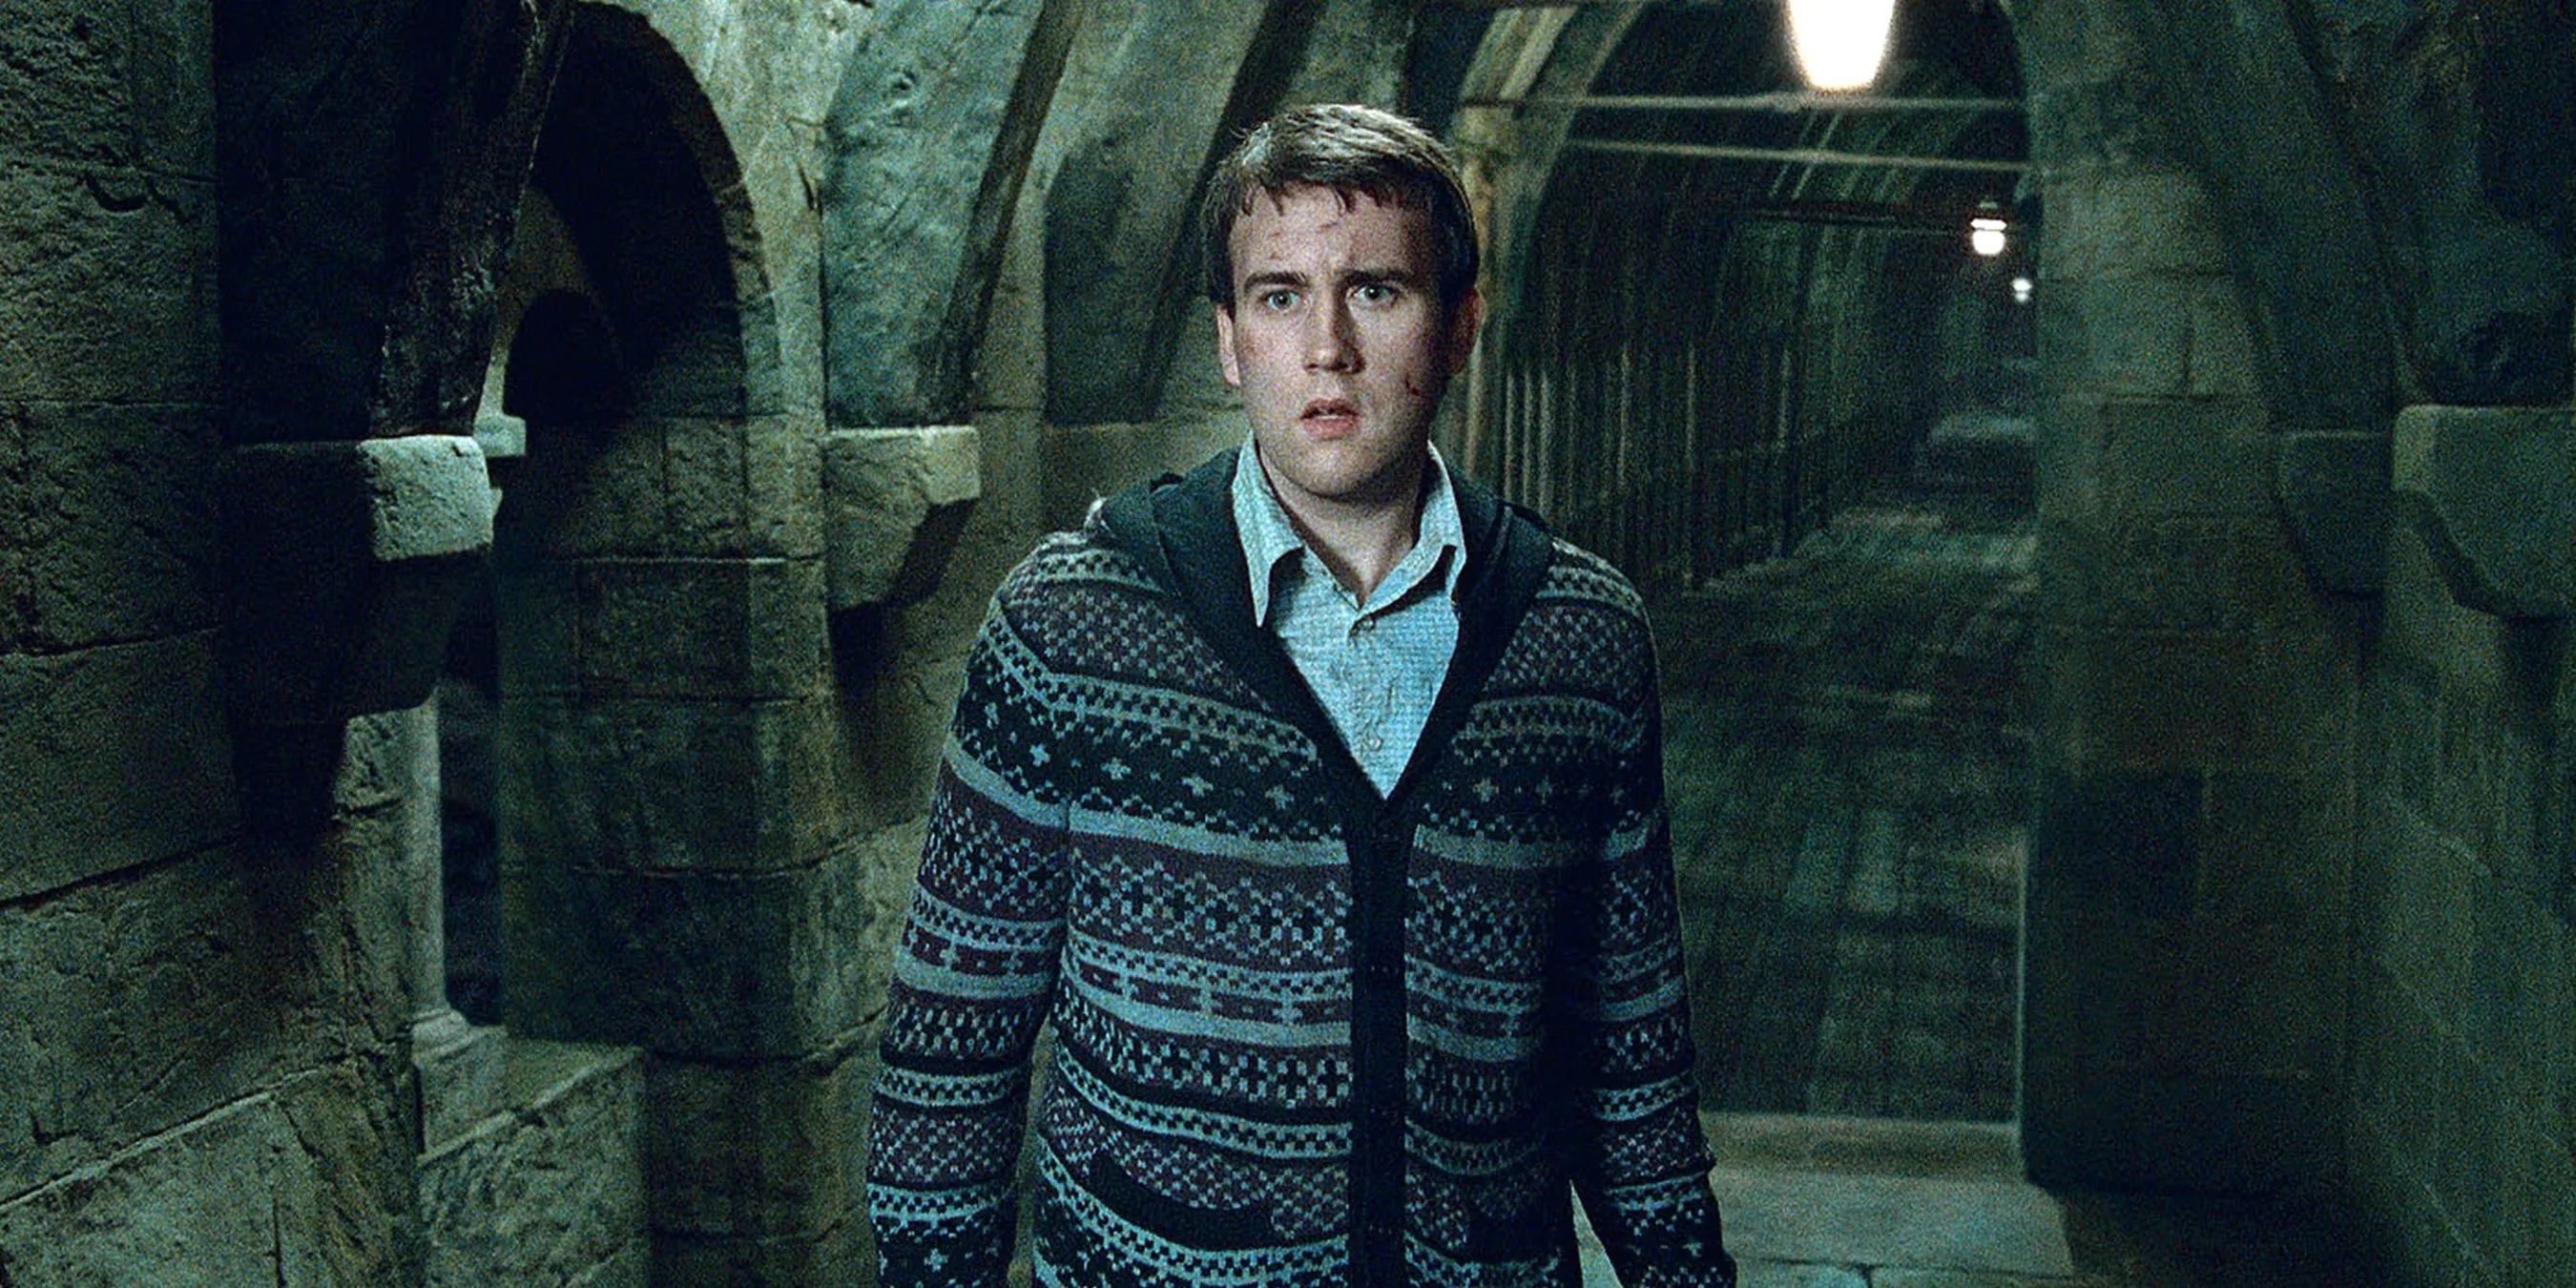 Neville Longbottom on the bridge before it gets blown up in Harry Potter and the Deathly Hallows: Part 2.